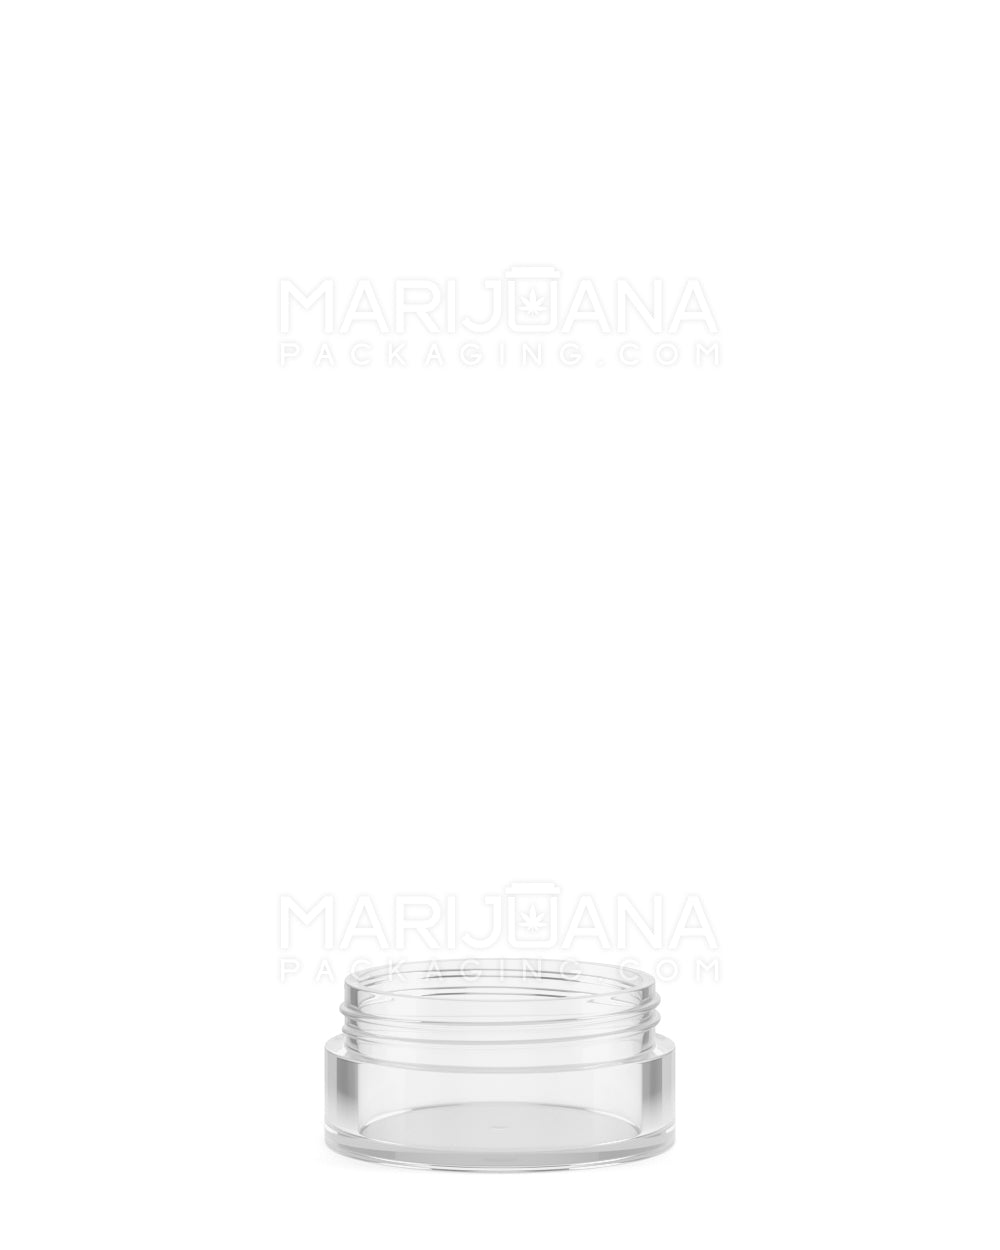 Clear Concentrate Containers w/ Screw Top Cap | 5mL - Plastic - 250 Count - 4